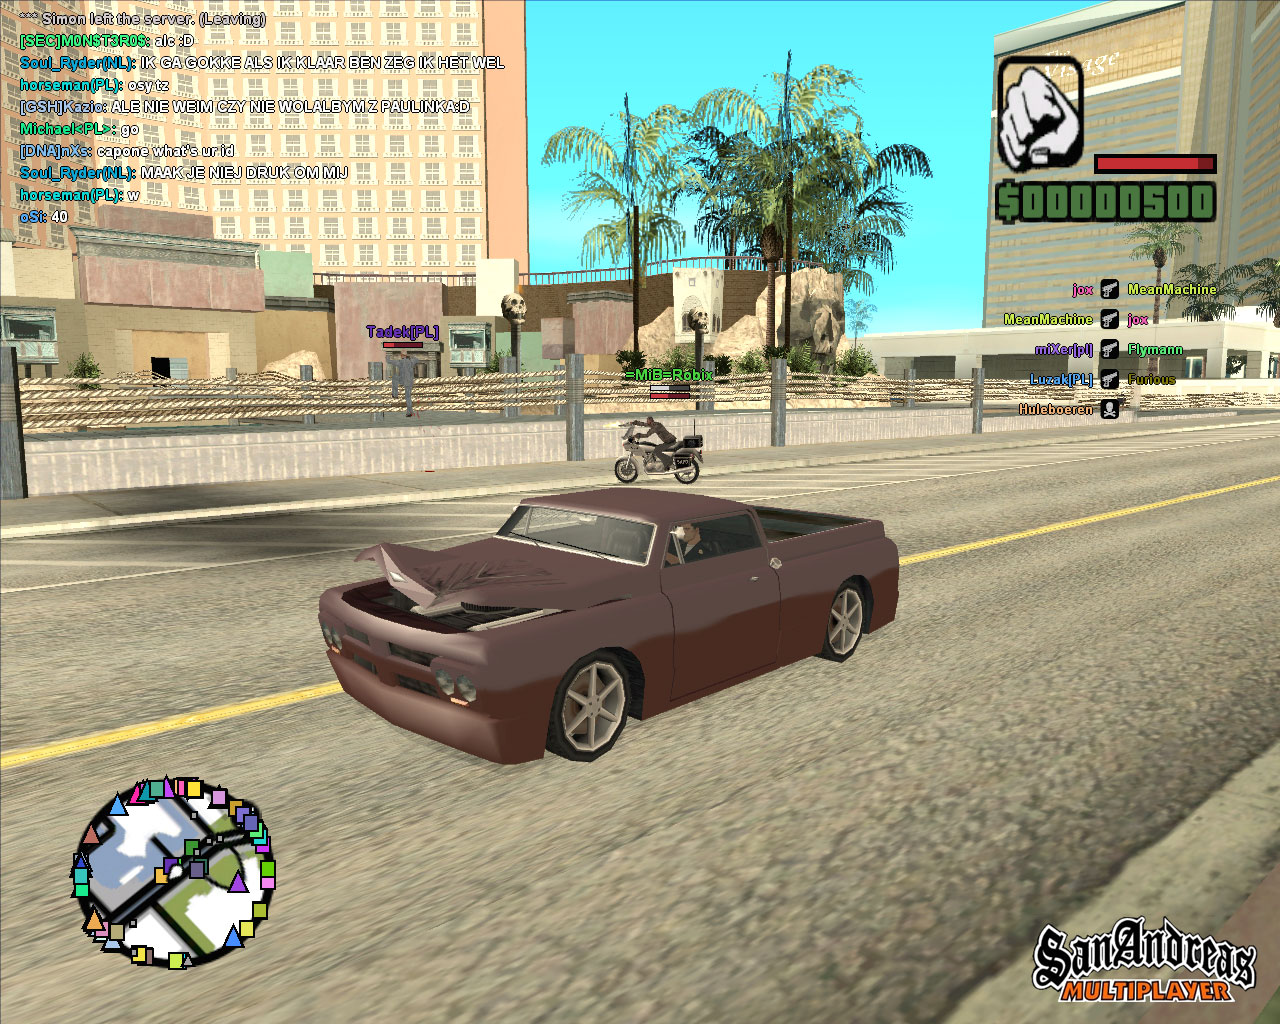 gta san andreas multiplayer android download 2021